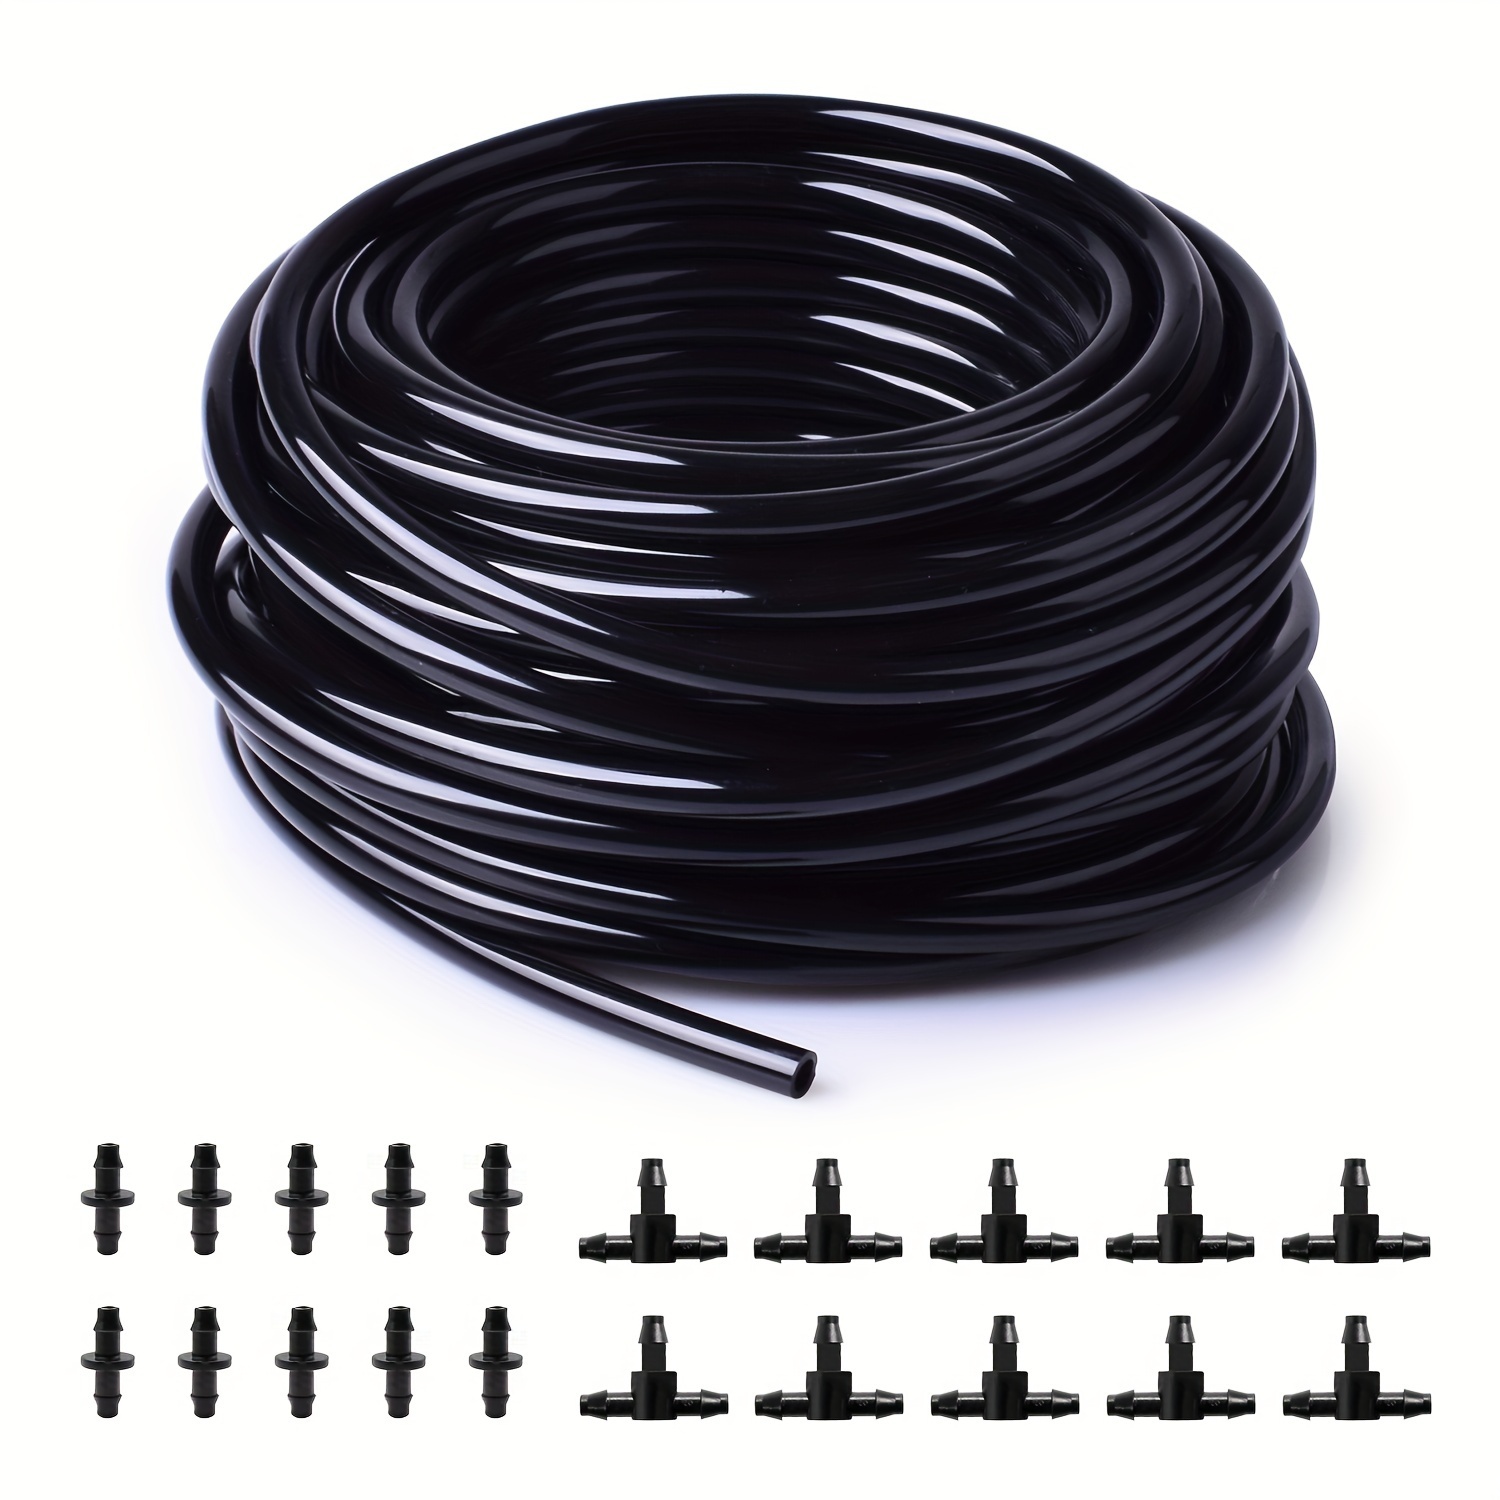 

precision Hydration" 50ft 1/4" Drip Irrigation Hose With 20 Adjustable Control Valve Switch - Universal Fit Garden Watering System